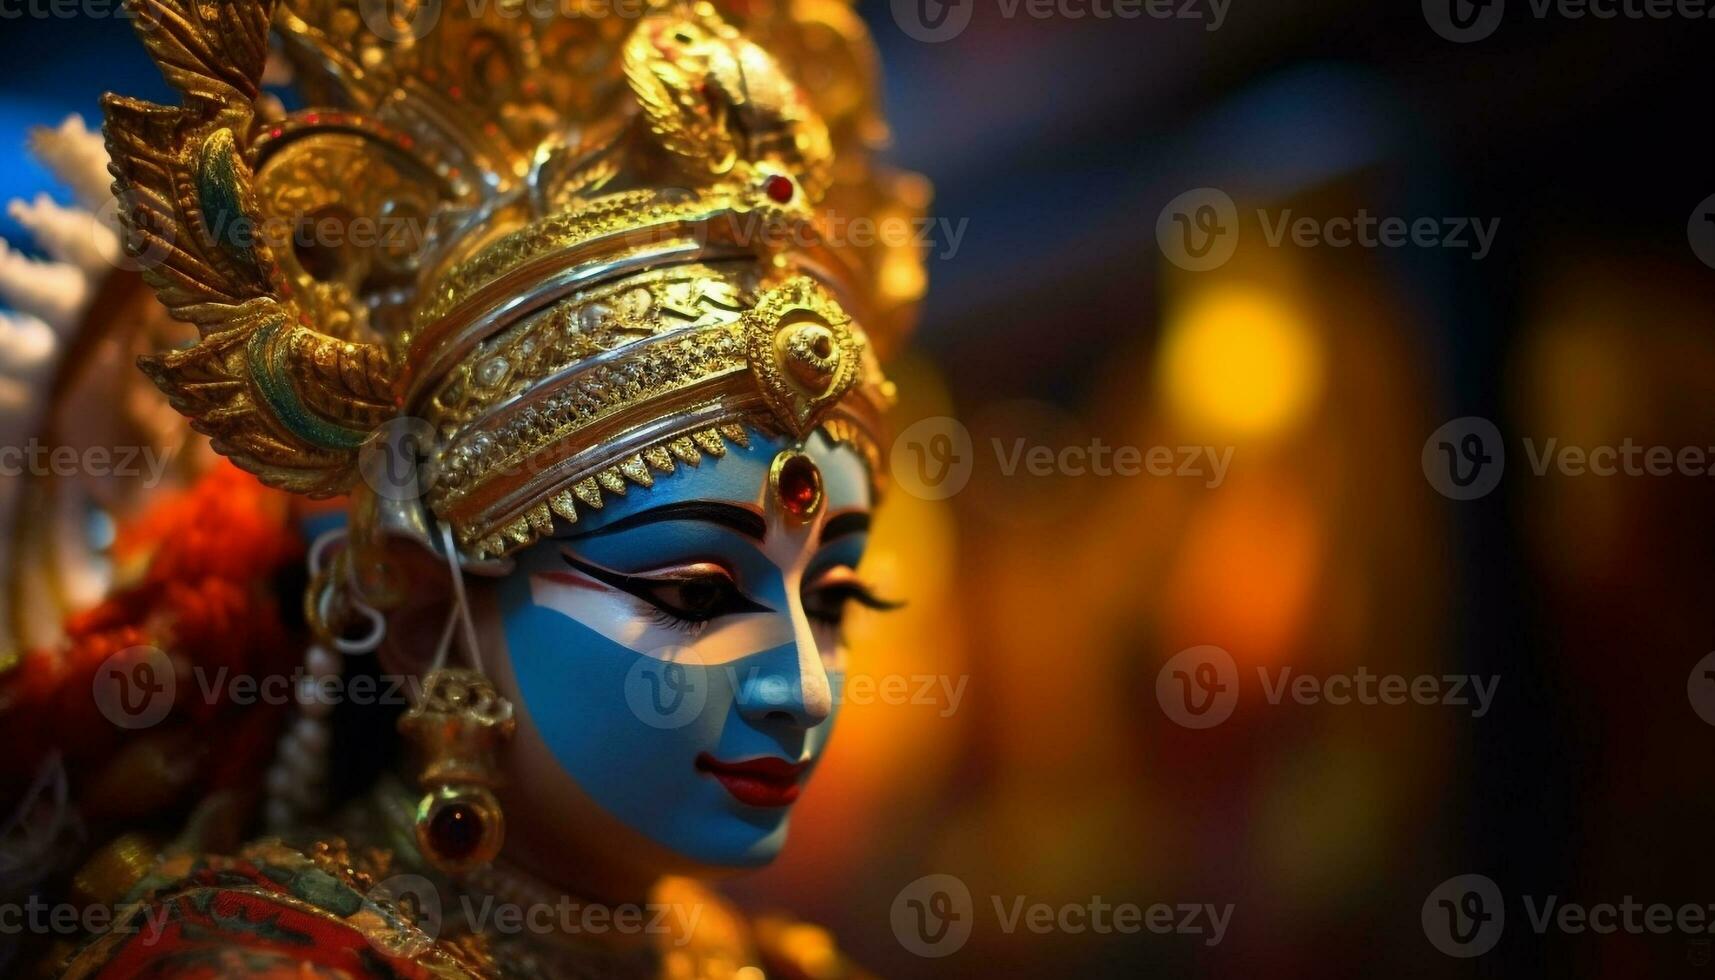 A beautiful Hindu statue celebrates traditional festival with elegance and spirituality generated by AI photo